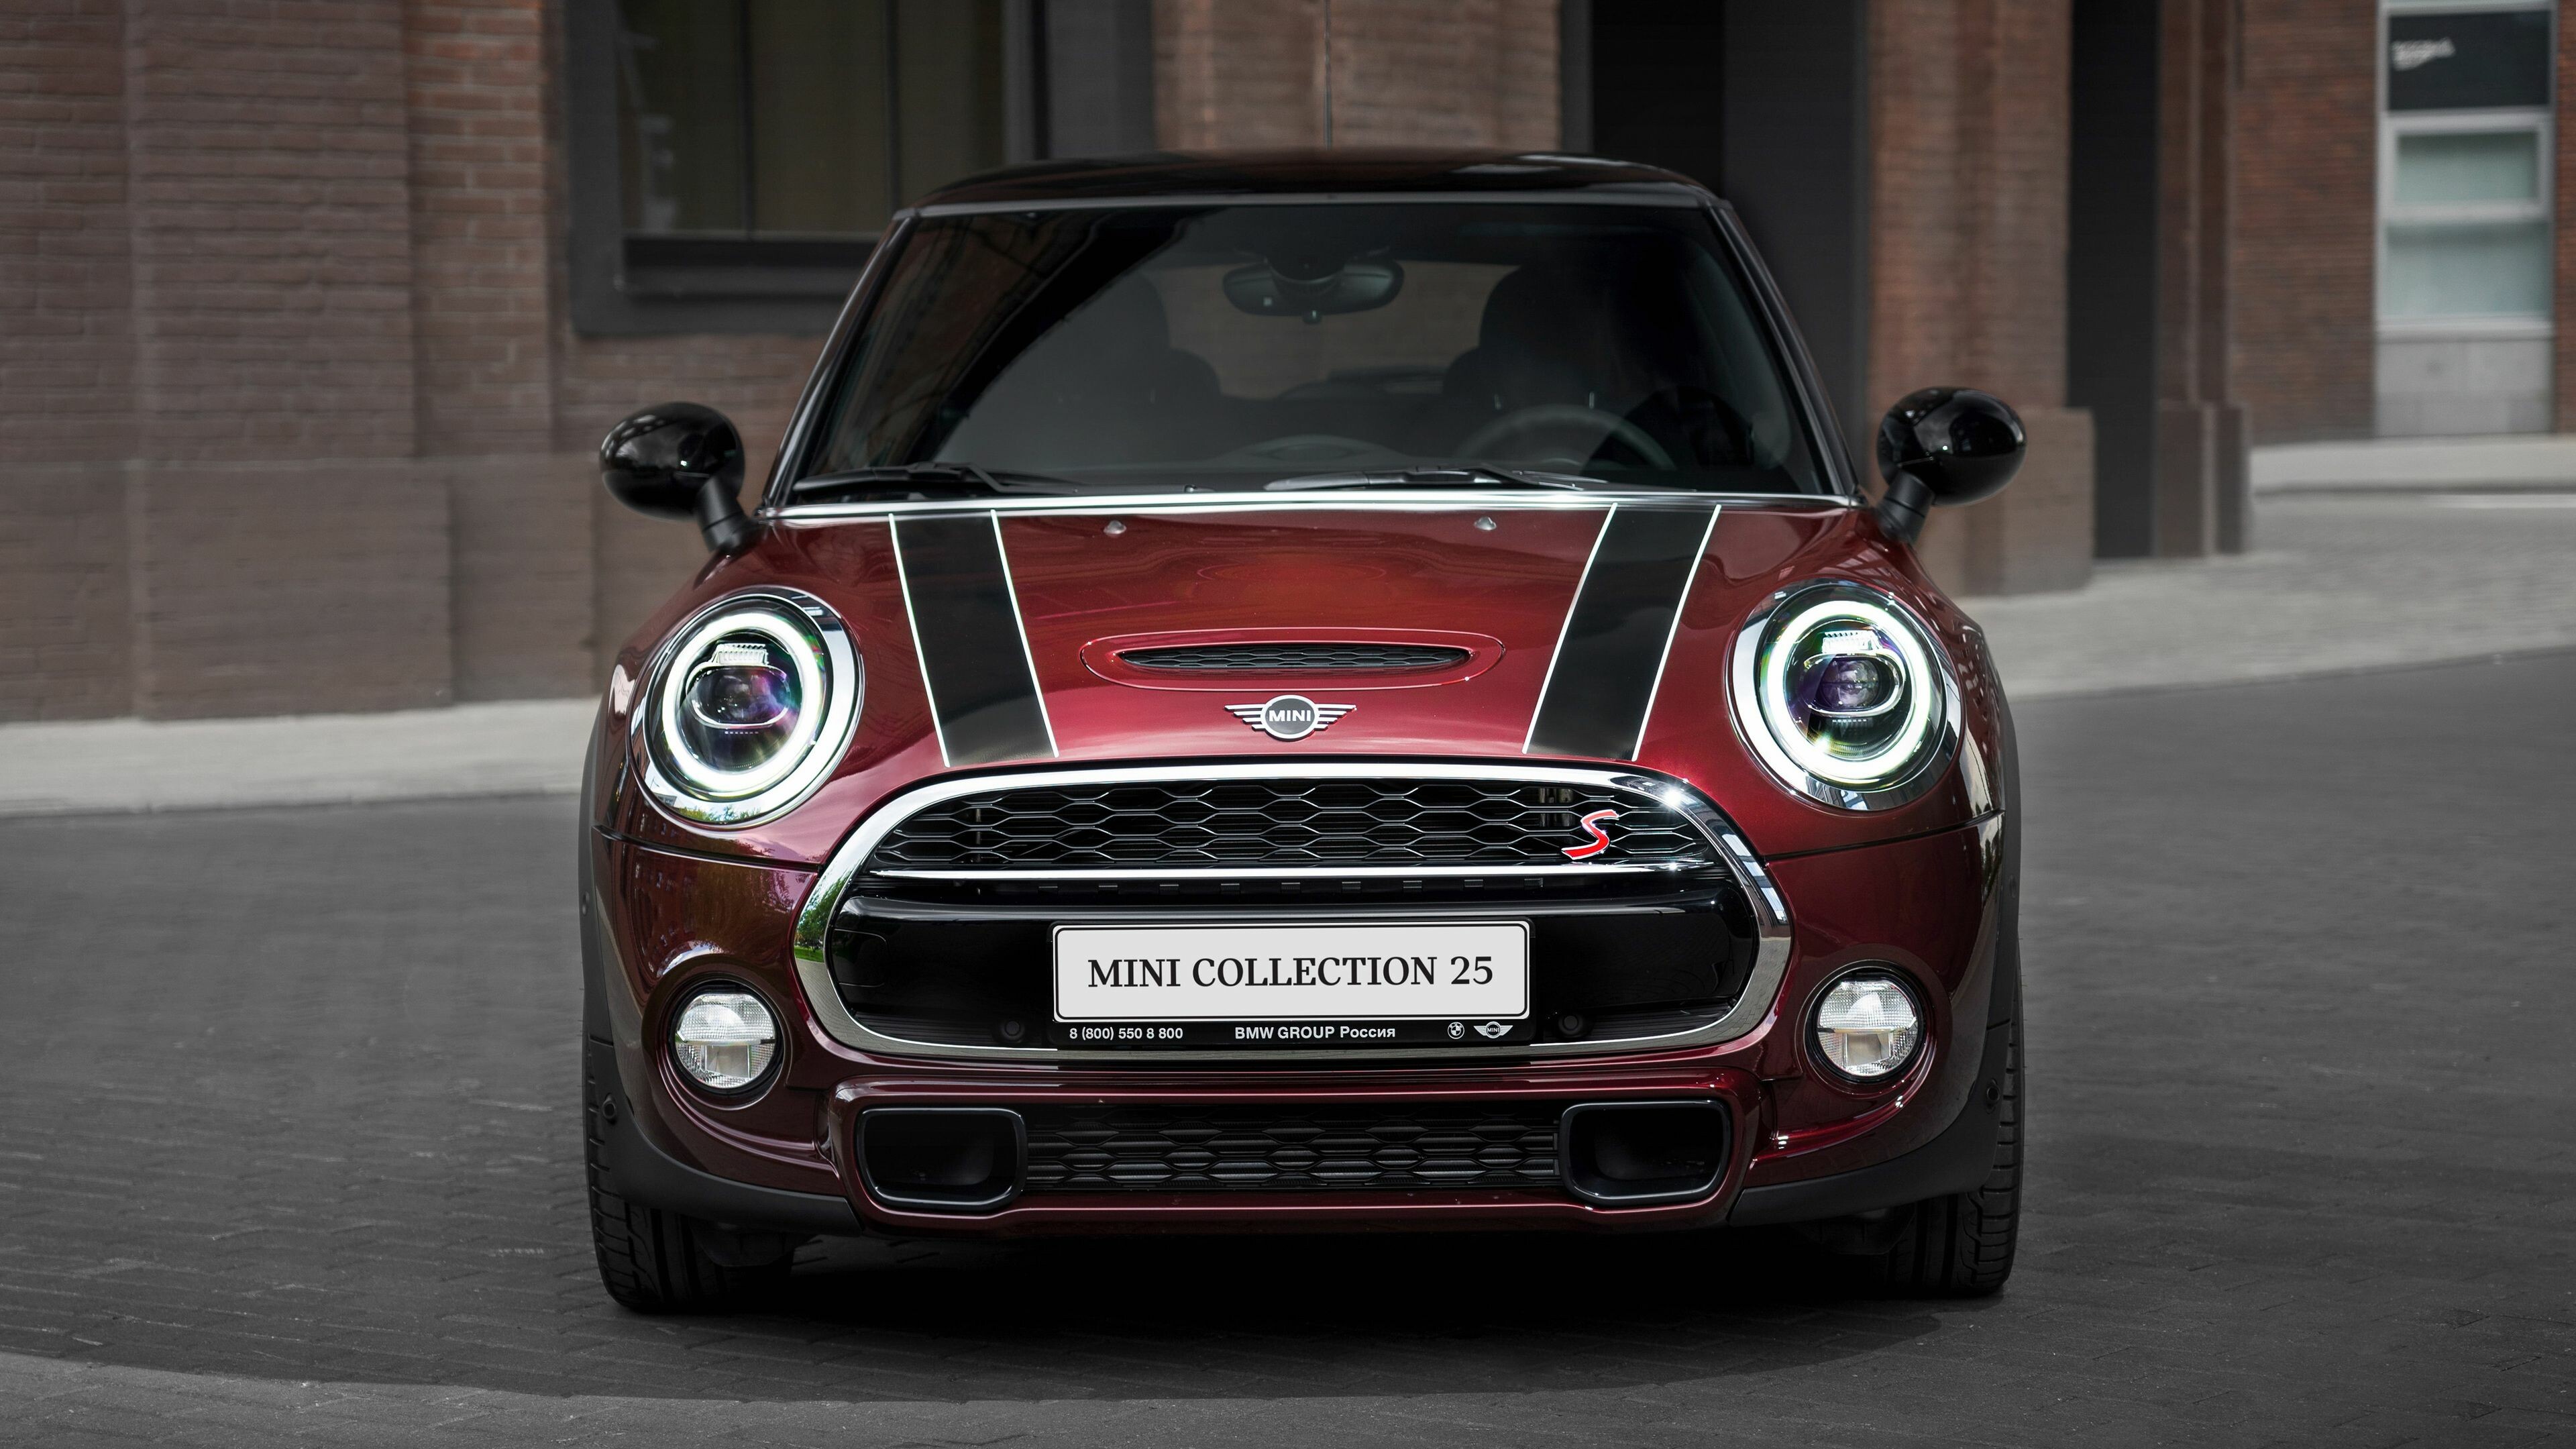 MINI Cooper: A British automotive marque, owned by German automotive company BMW since 2000. 3840x2160 4K Wallpaper.